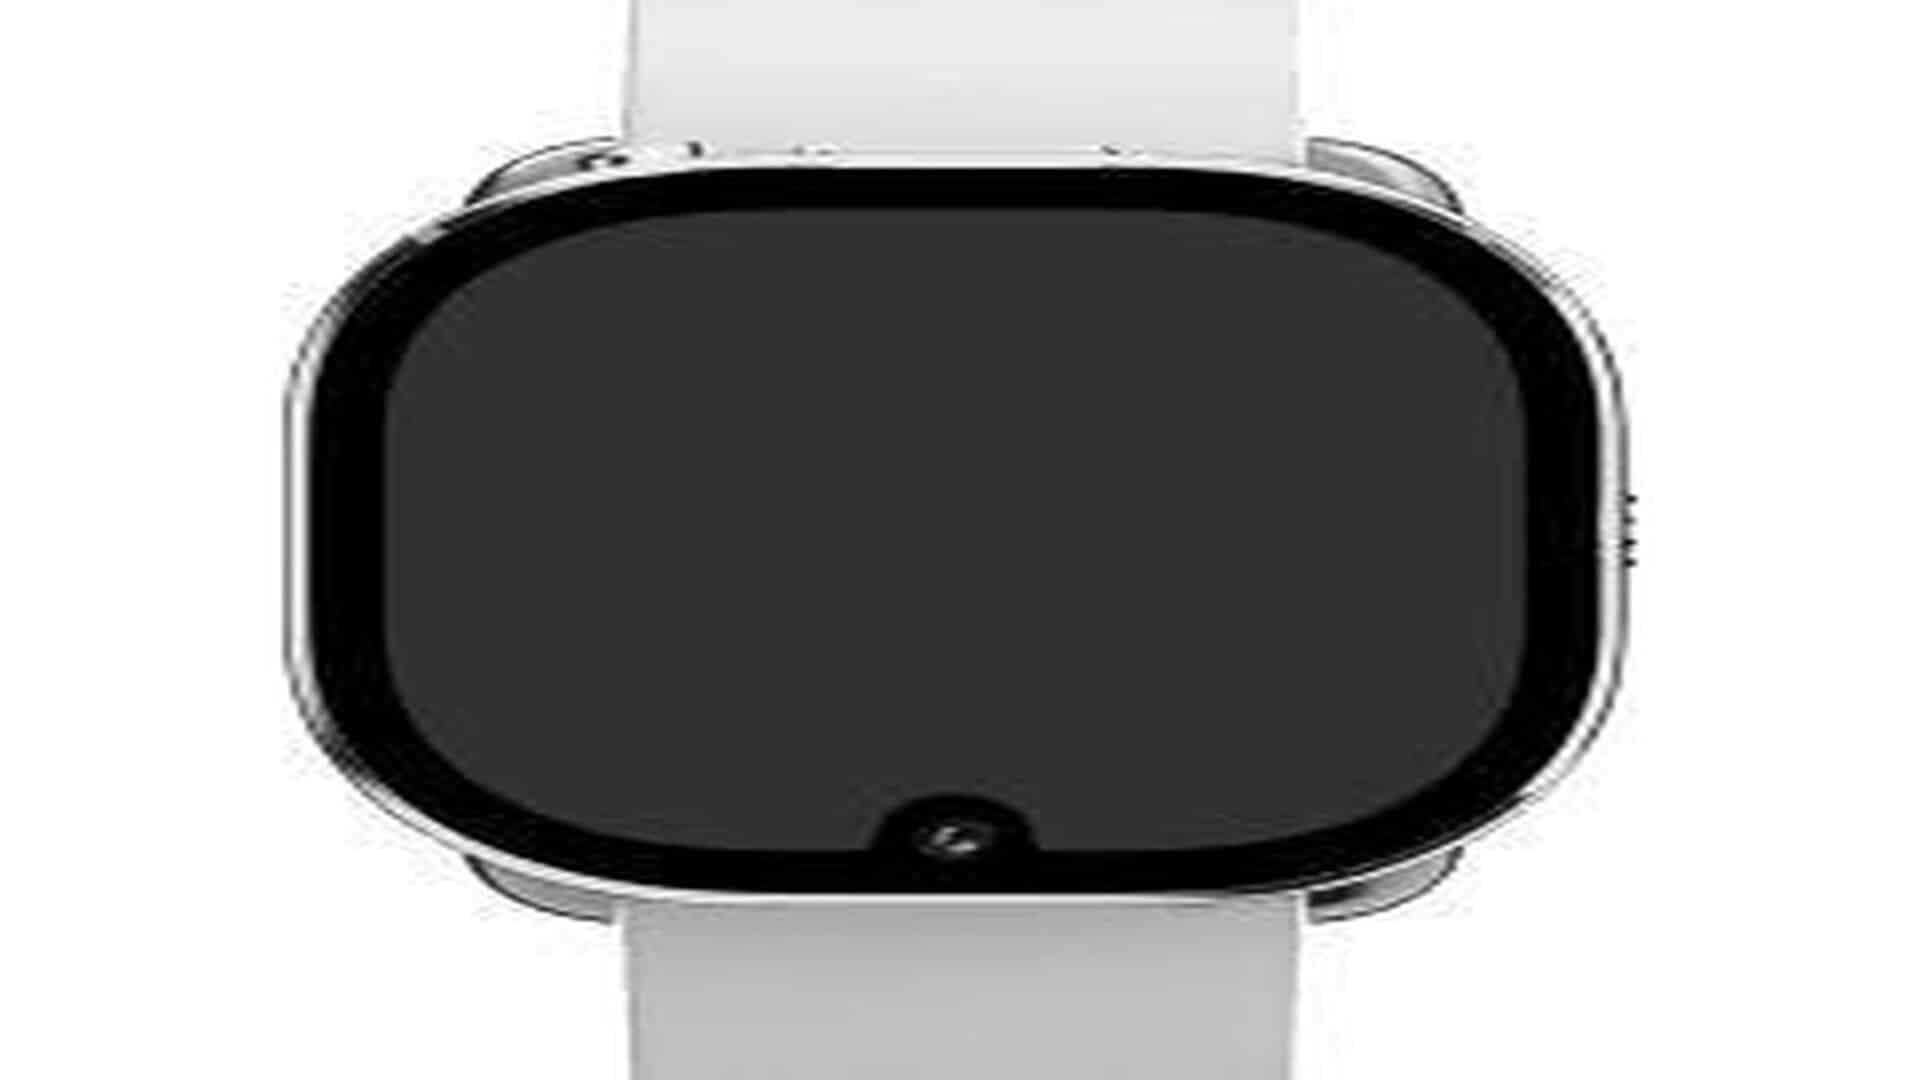 Meta develops smartwatch with front-facing camera